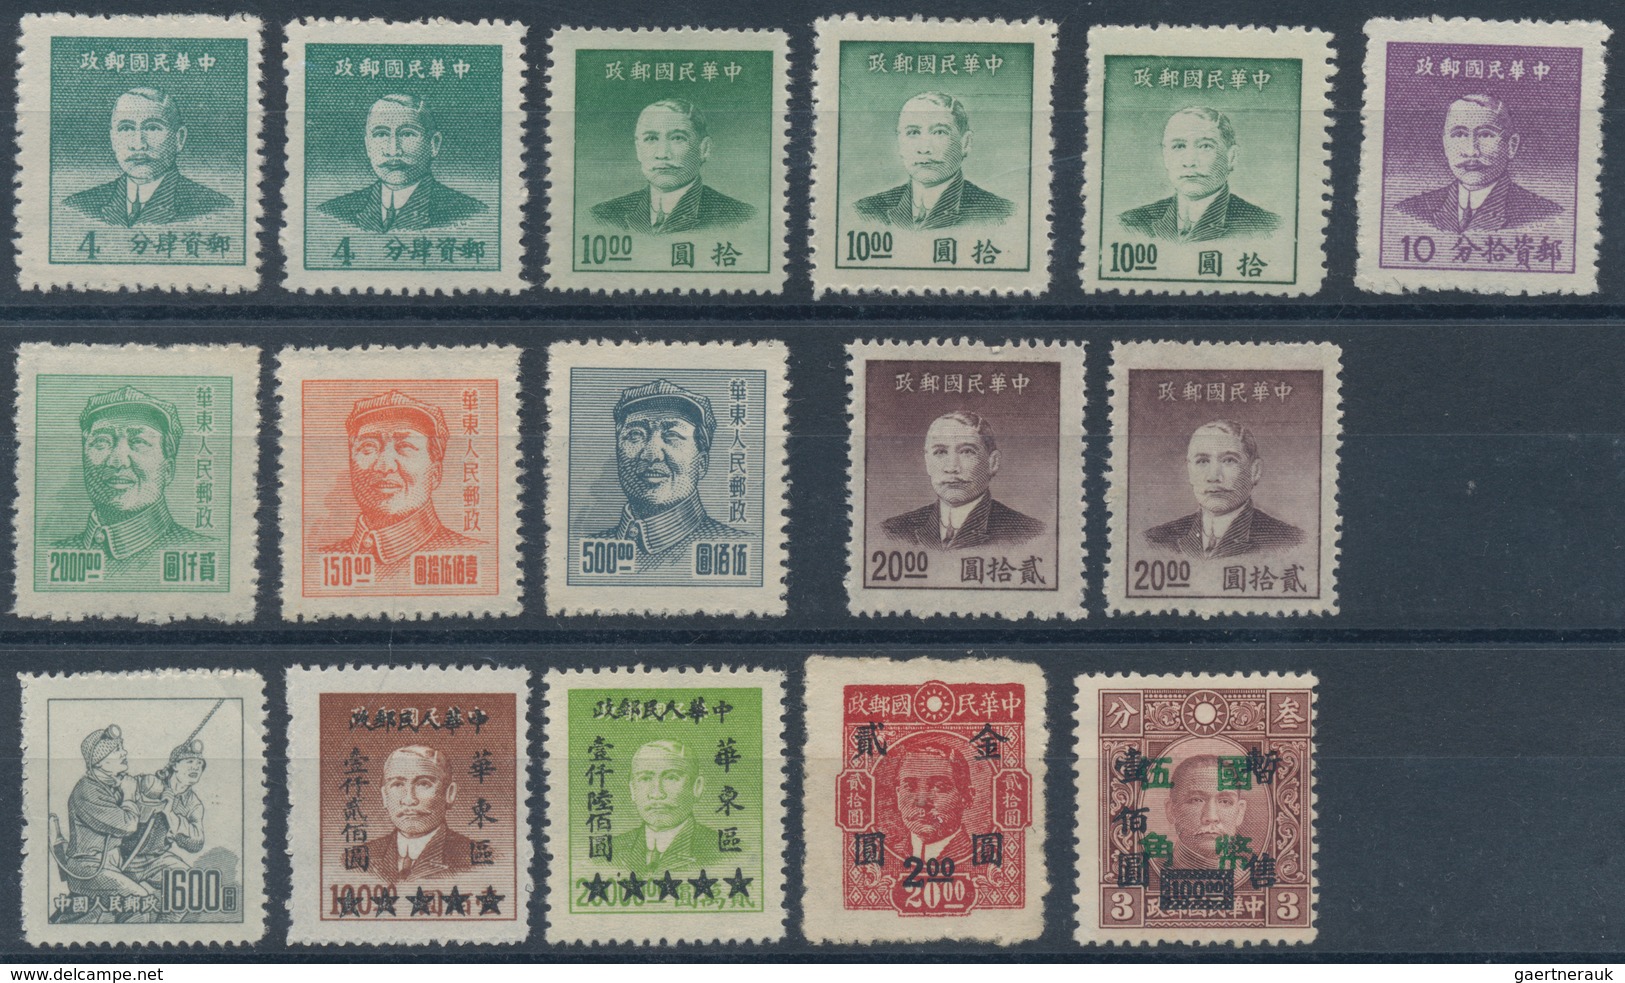 China - Volksrepublik: 1950s/1970s, PRC and some Taiwan, mainly unused lot on stockcards.